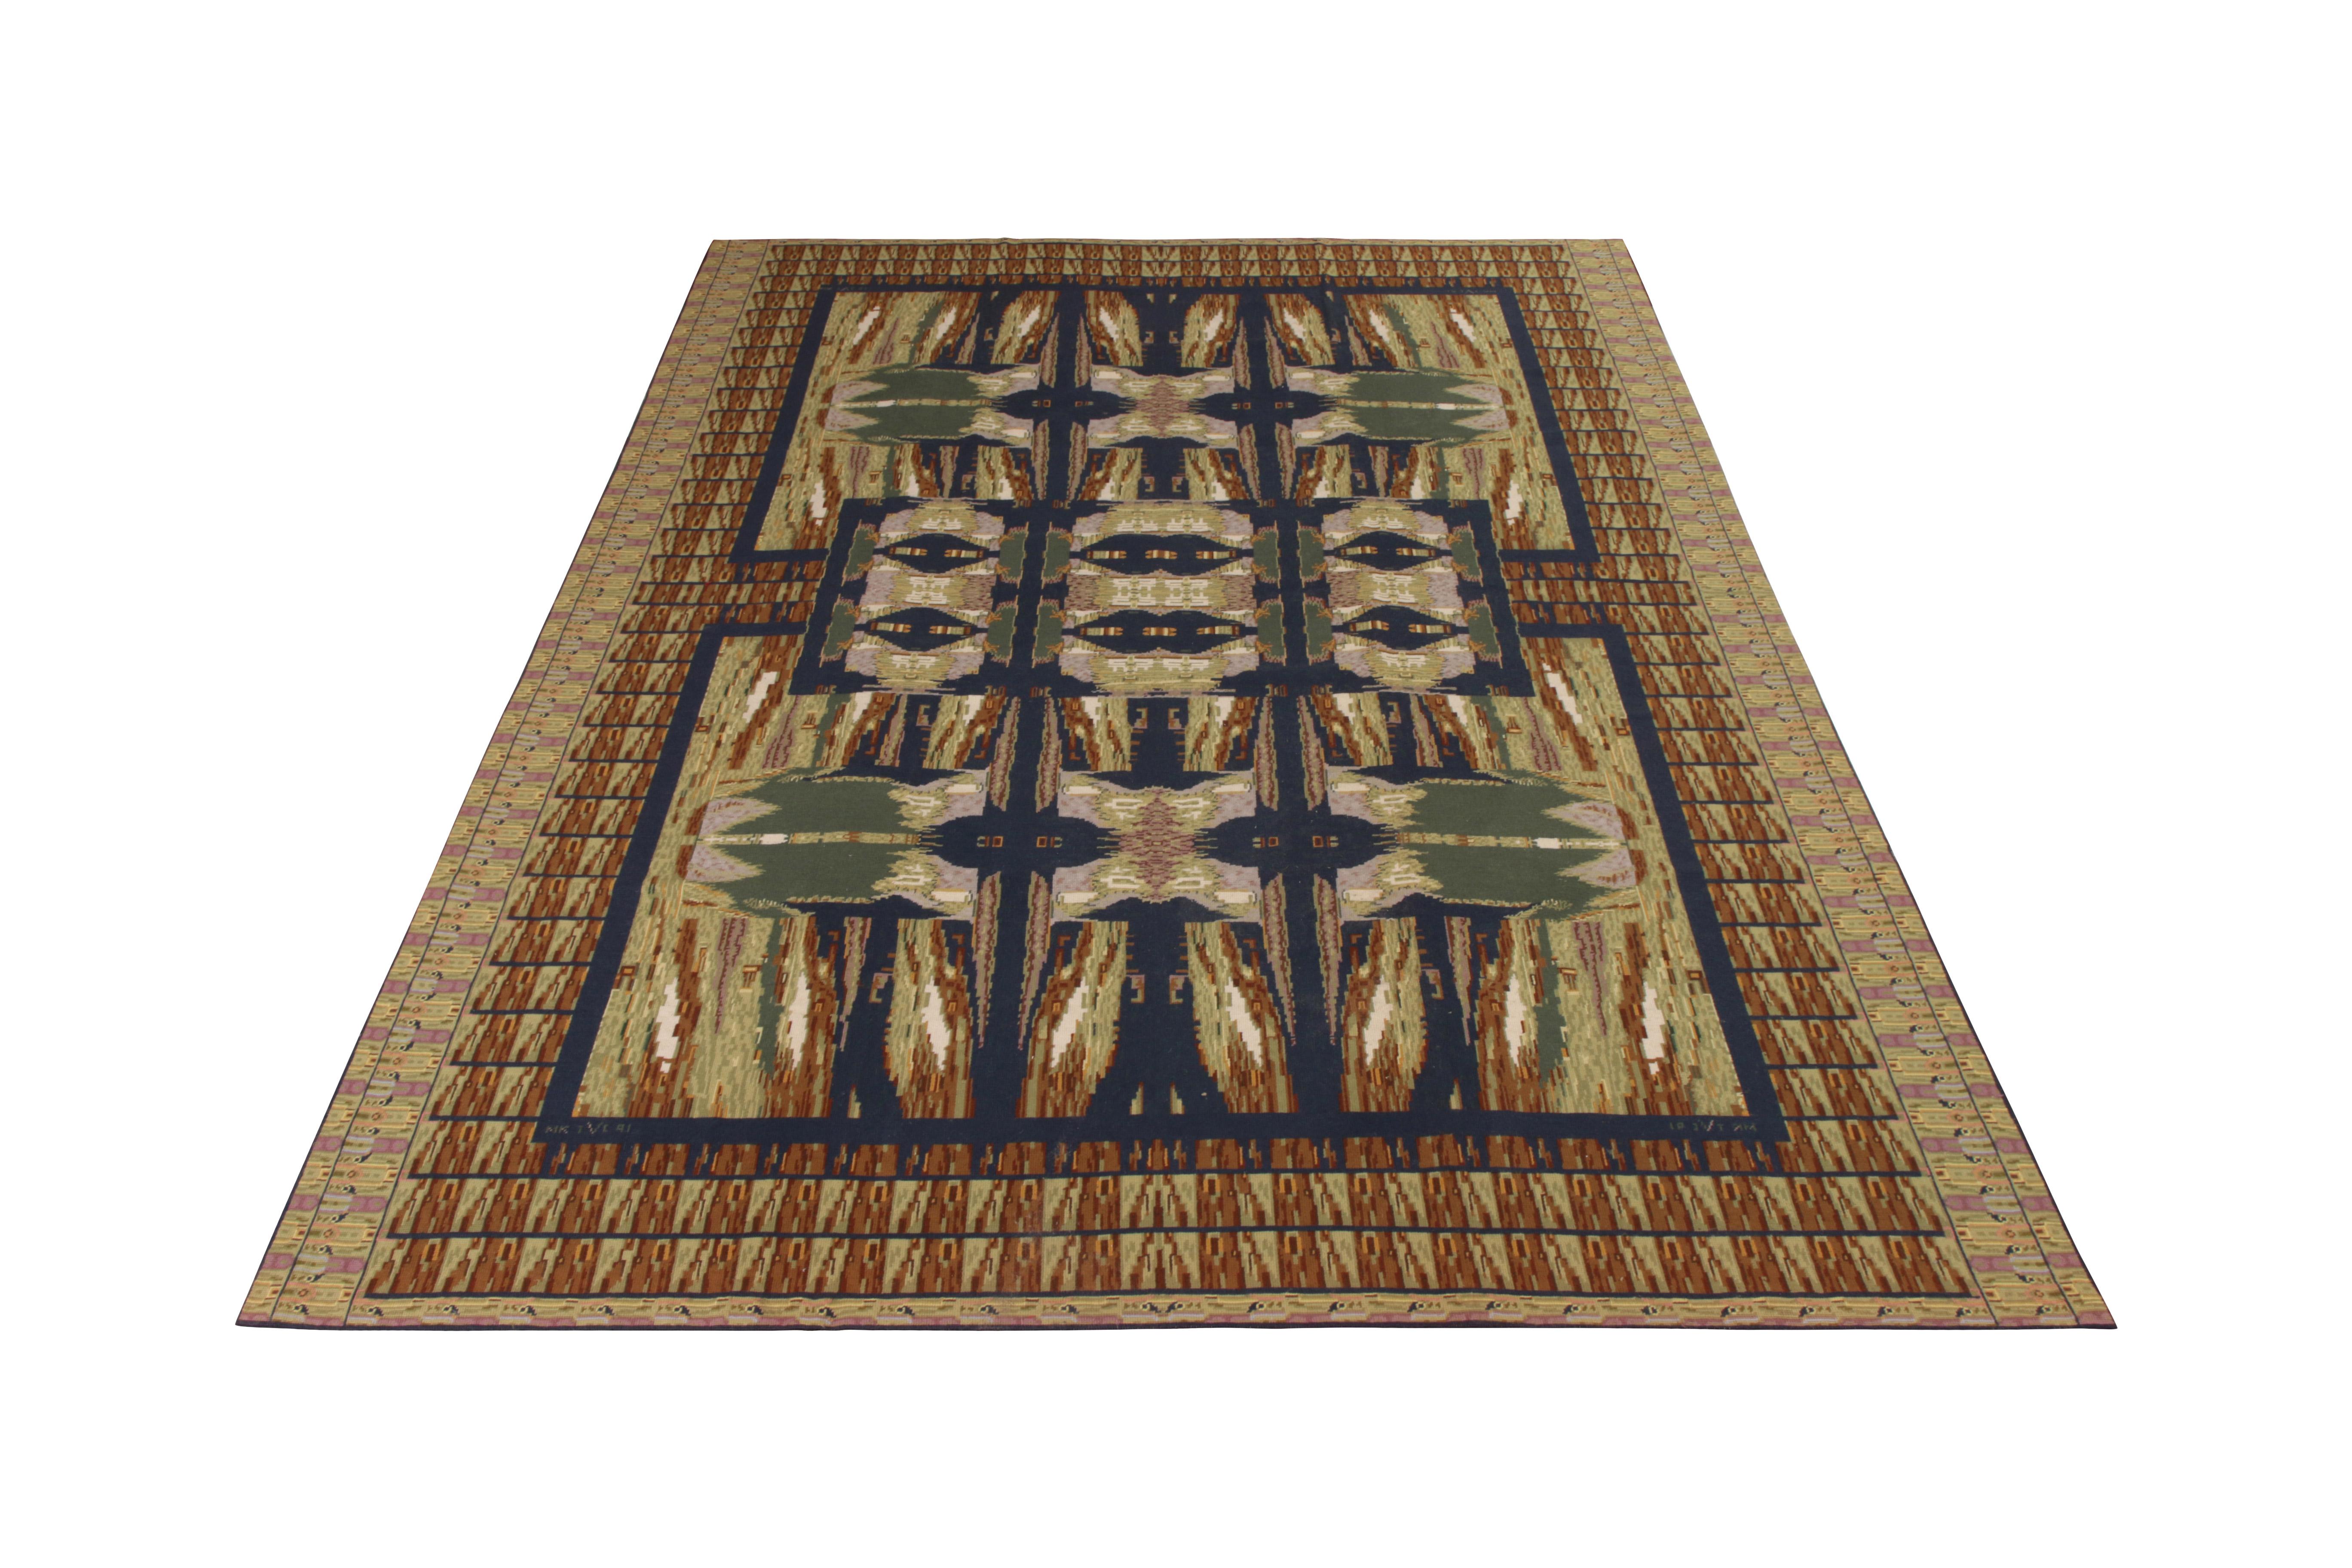 An unveiling from the contemporary needlepoint selections in the Kilim and flat-weave collection from Rug & Kilim, here celebrating a 9 x 13 needlepoint rug from the works of Teddy Sumner, handmade in wool in this distinctive take on Art Deco style.